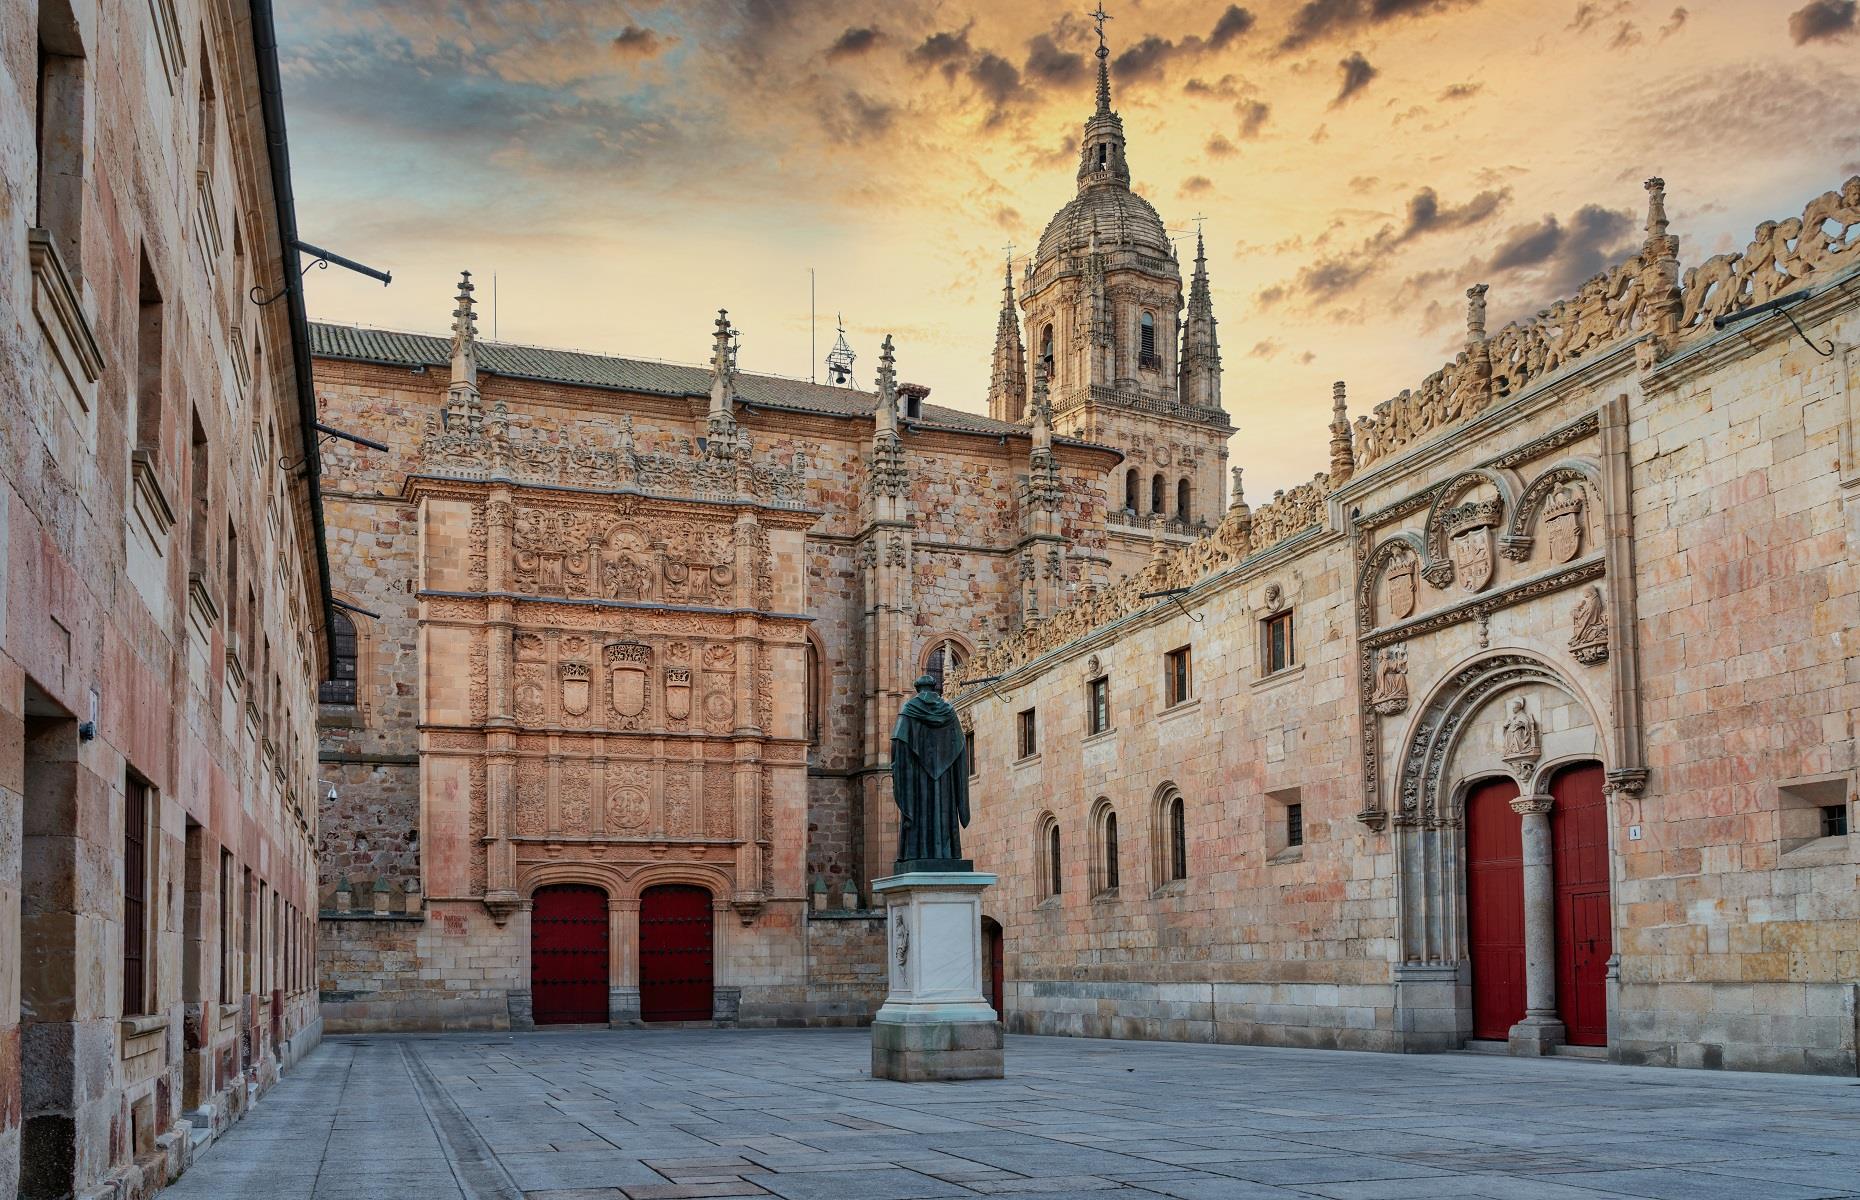 <p>On the complete opposite end of the architectural spectrum, you'll find the <a href="https://www.usal.es/">University of Salamanca</a>. Founded in the 12th century, this institution is one of the oldest universities in existence. The college was given a Royal Charter by King Alfonso IX in 1218 and blends Romanesque, Gothic, Moorish, Renaissance and Baroque architecture. In fact, the entire city of Salamanca was named a UNESCO World Heritage Site in 1988.</p>  <p><a href="https://www.loveexploring.com/news/70500/best-cities-in-spain"><strong>These are the best cities to visit in Spain</strong></a></p>